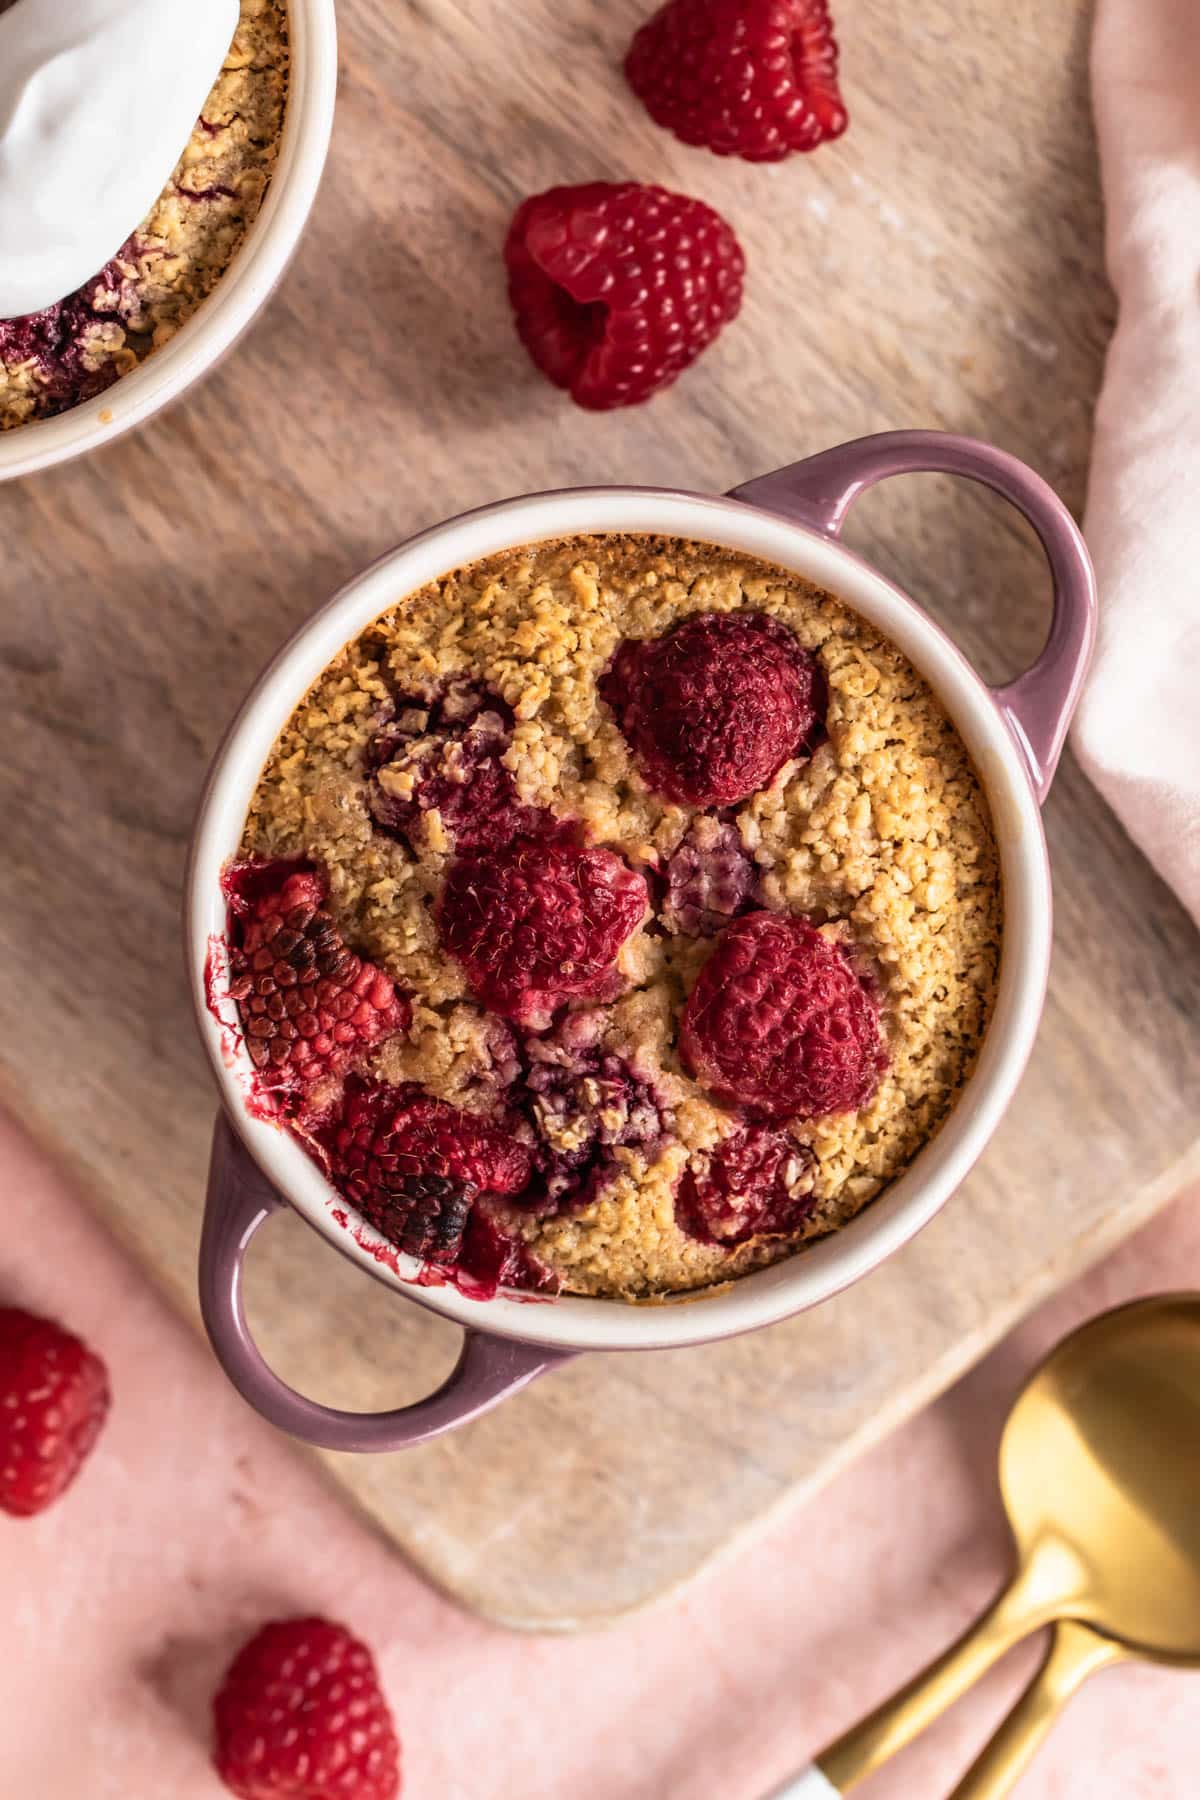 Raspberry Baked Oats in a small ramekin, with raspberries to the side.